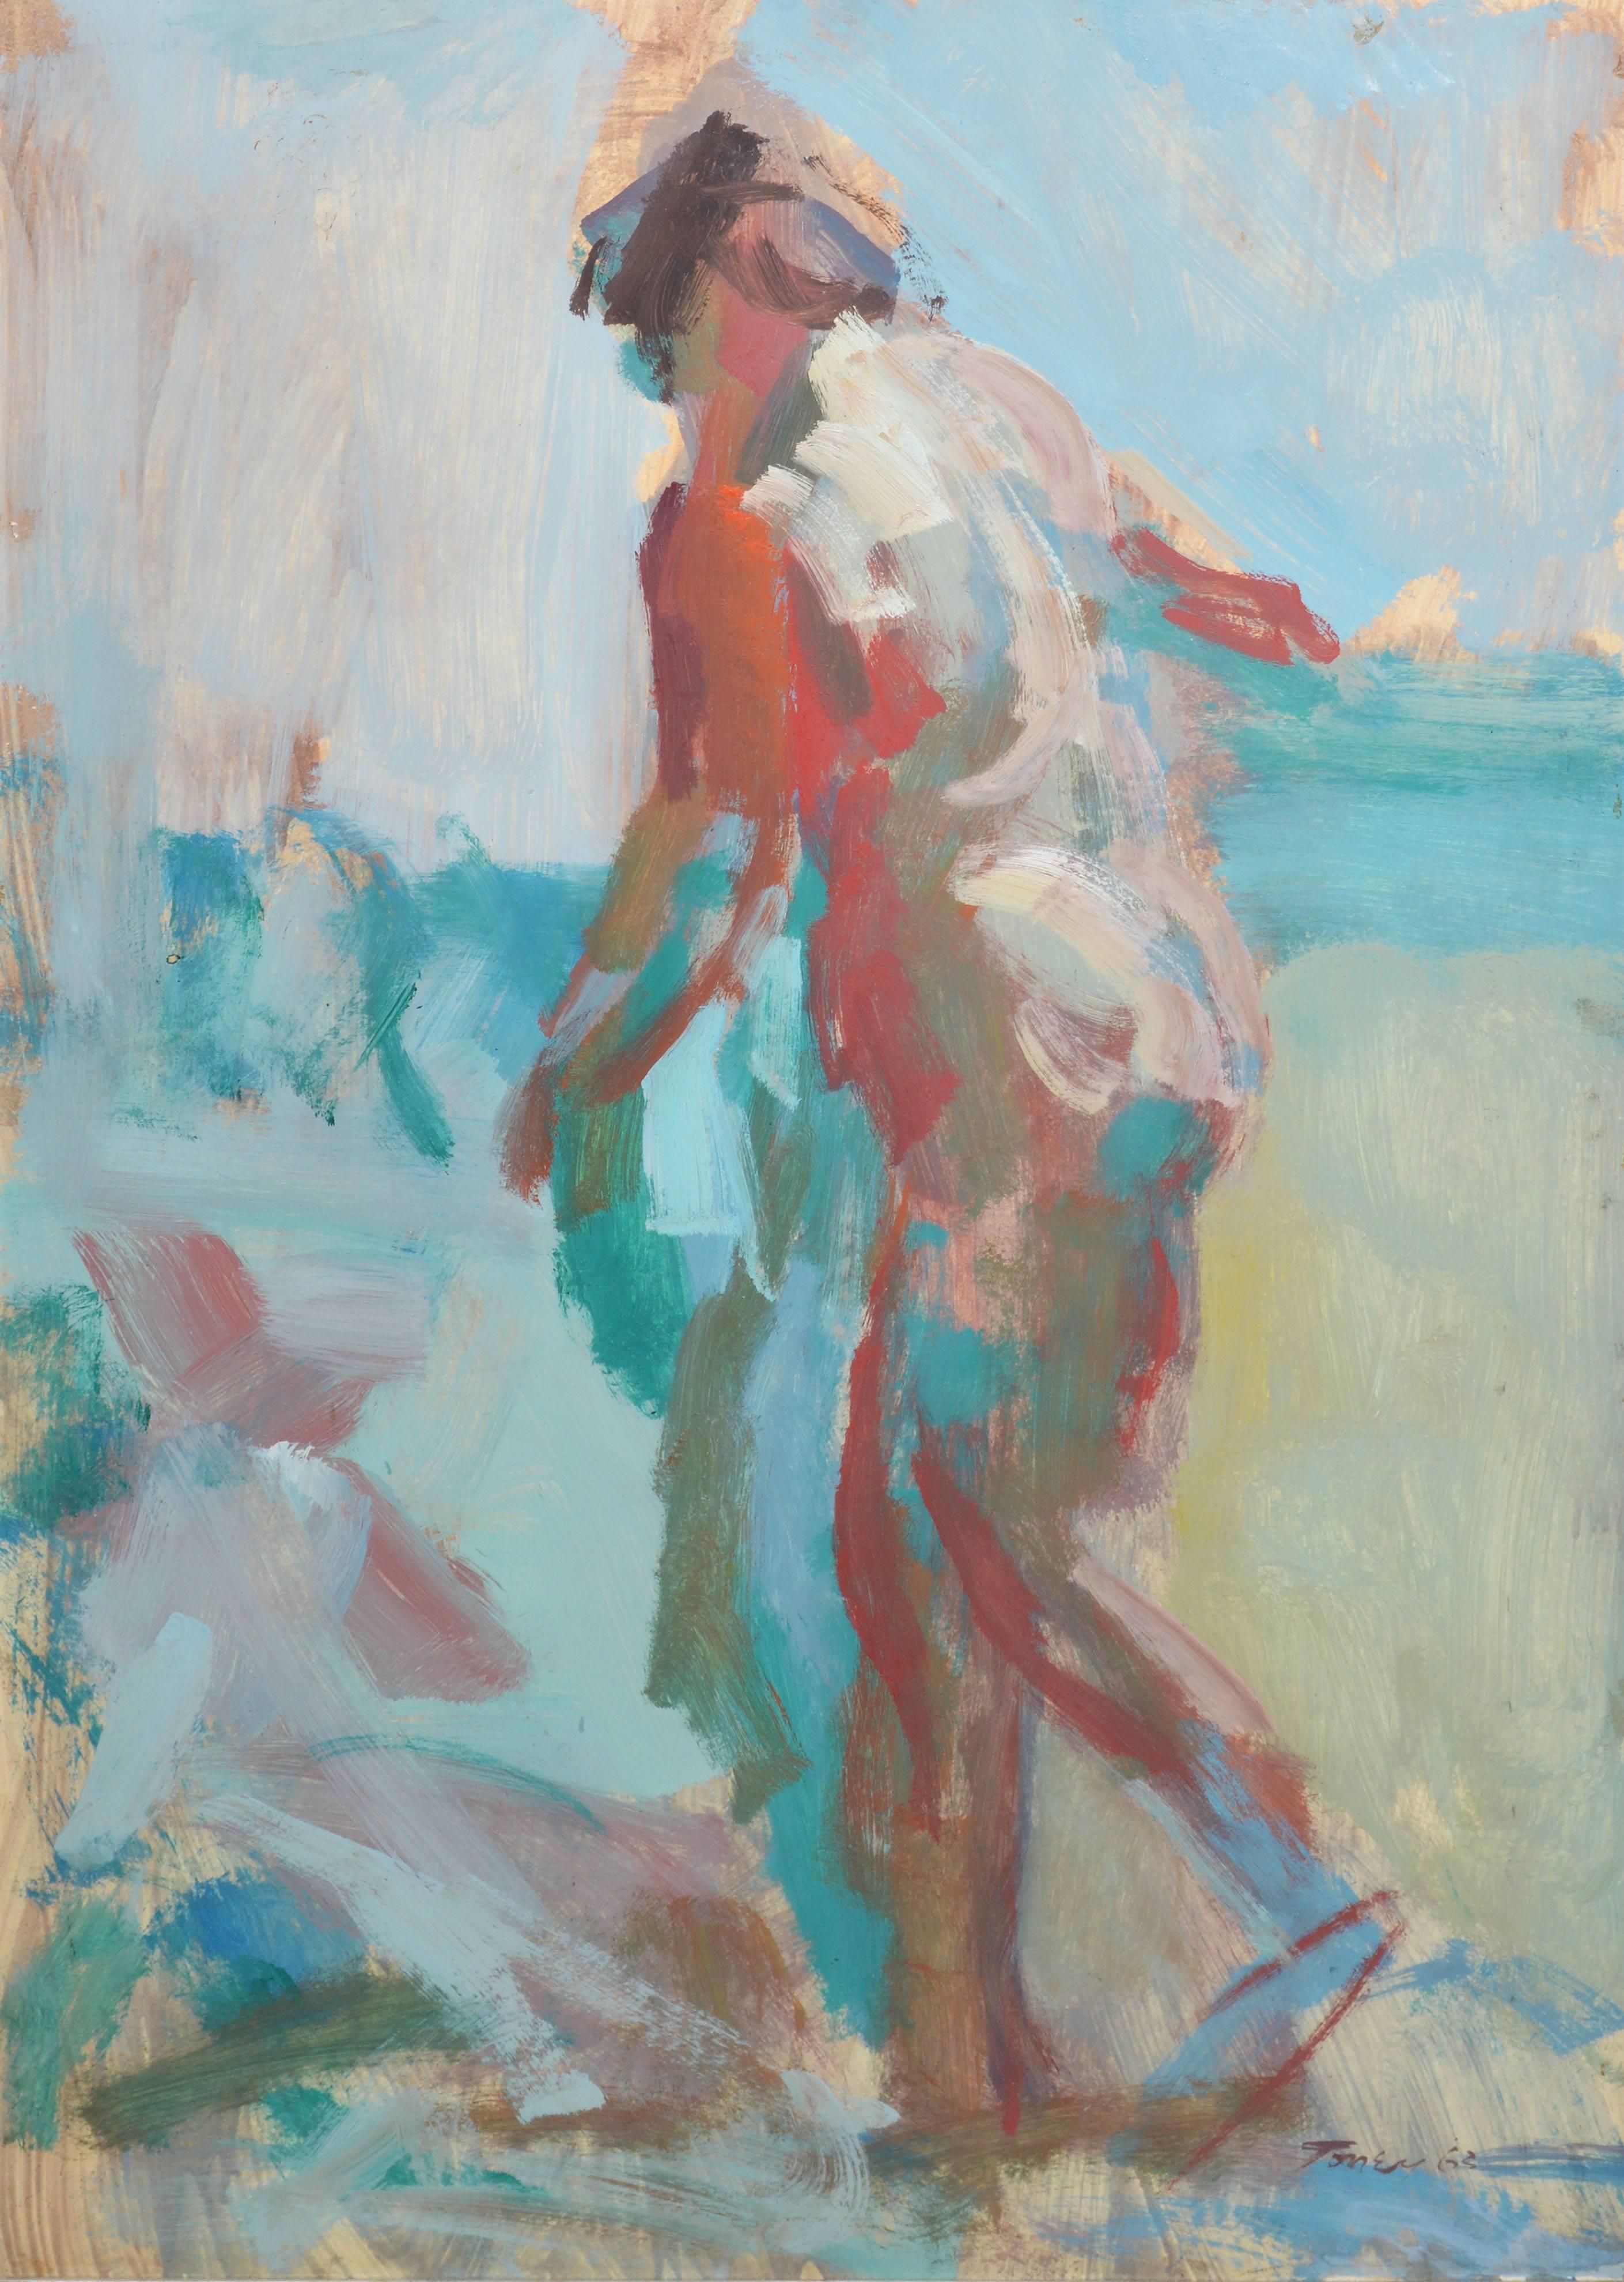 Modernist beach view with a figure.  Oil in board, circa 1963.  Signed illegibly lower right.  Displayed in a wood frame with a linen liner.  Image size, 22"L x 35"H, overall 27"L x 39"H.